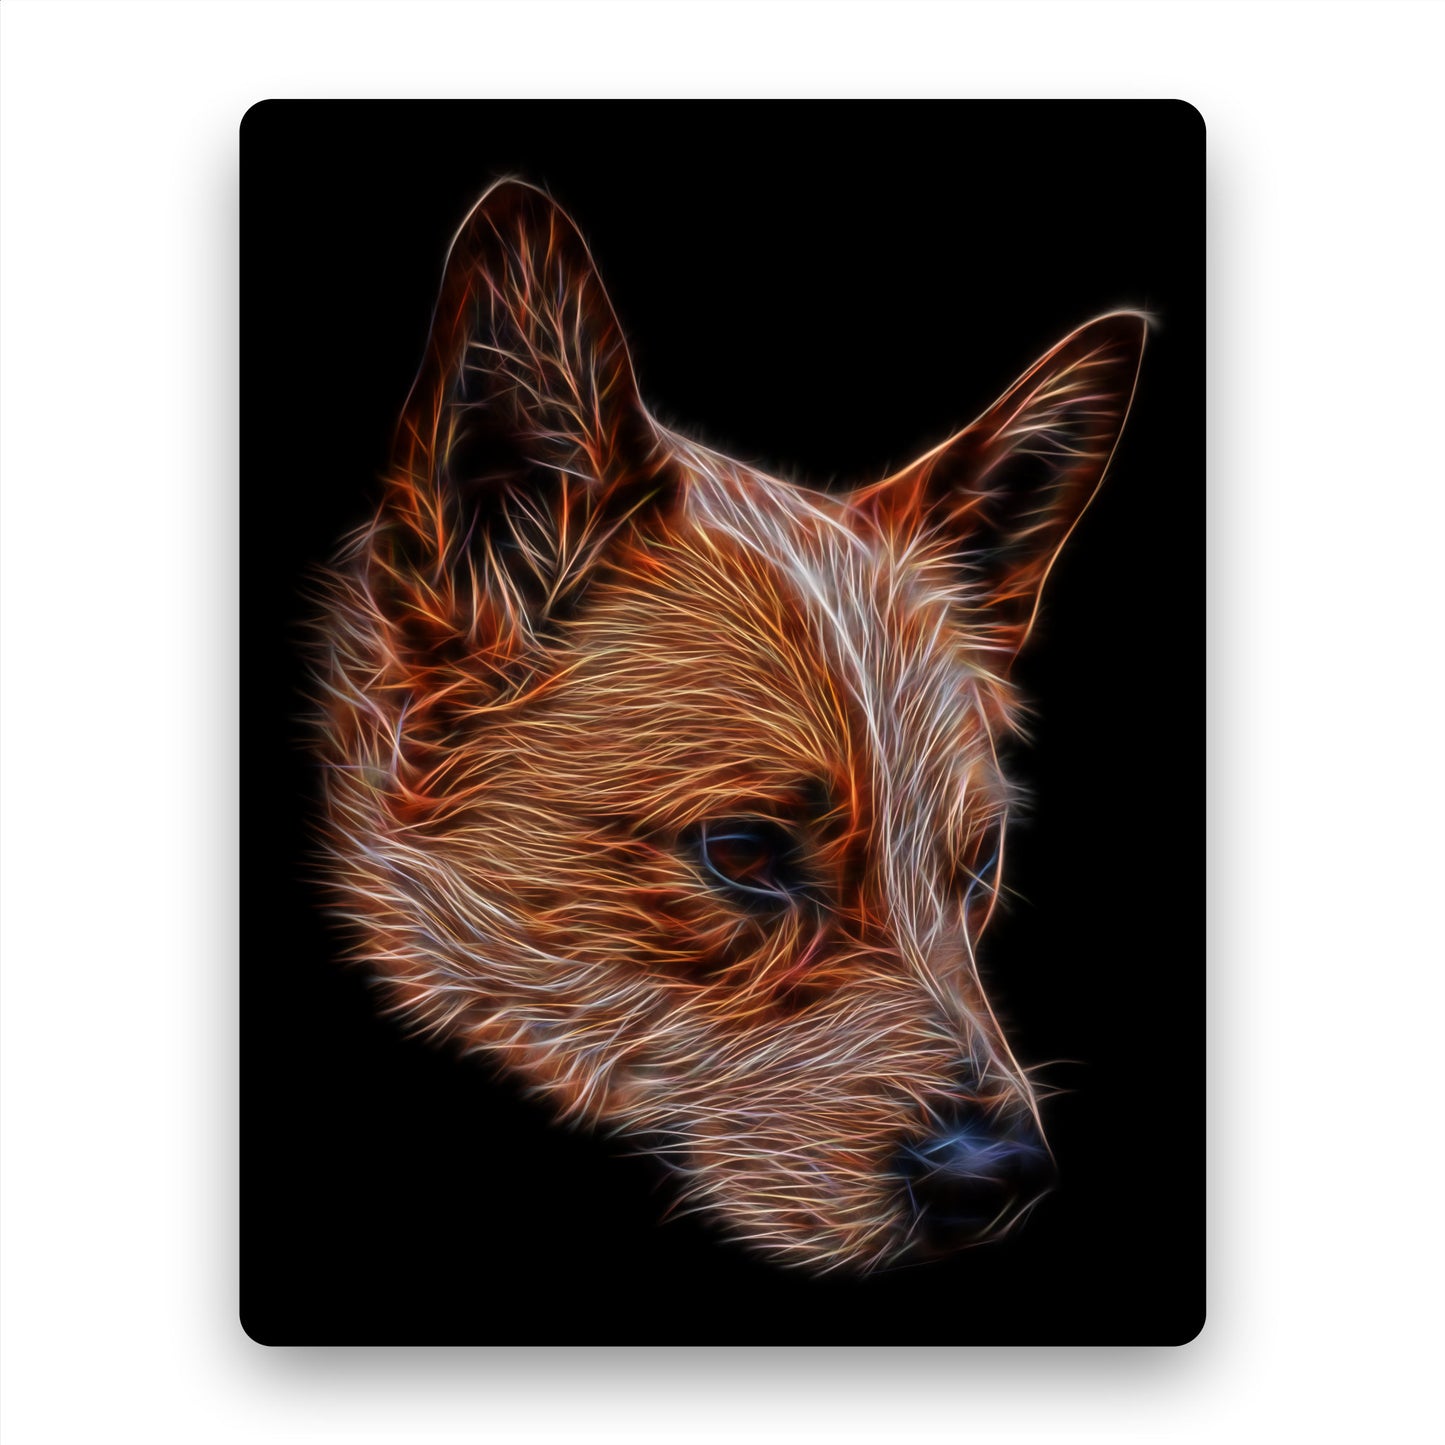 Australian Cattle Dog - Red Heeler Metal Wall Plaque with Fractal Art Design,  Perfect Cattle Dog Owner Gift.